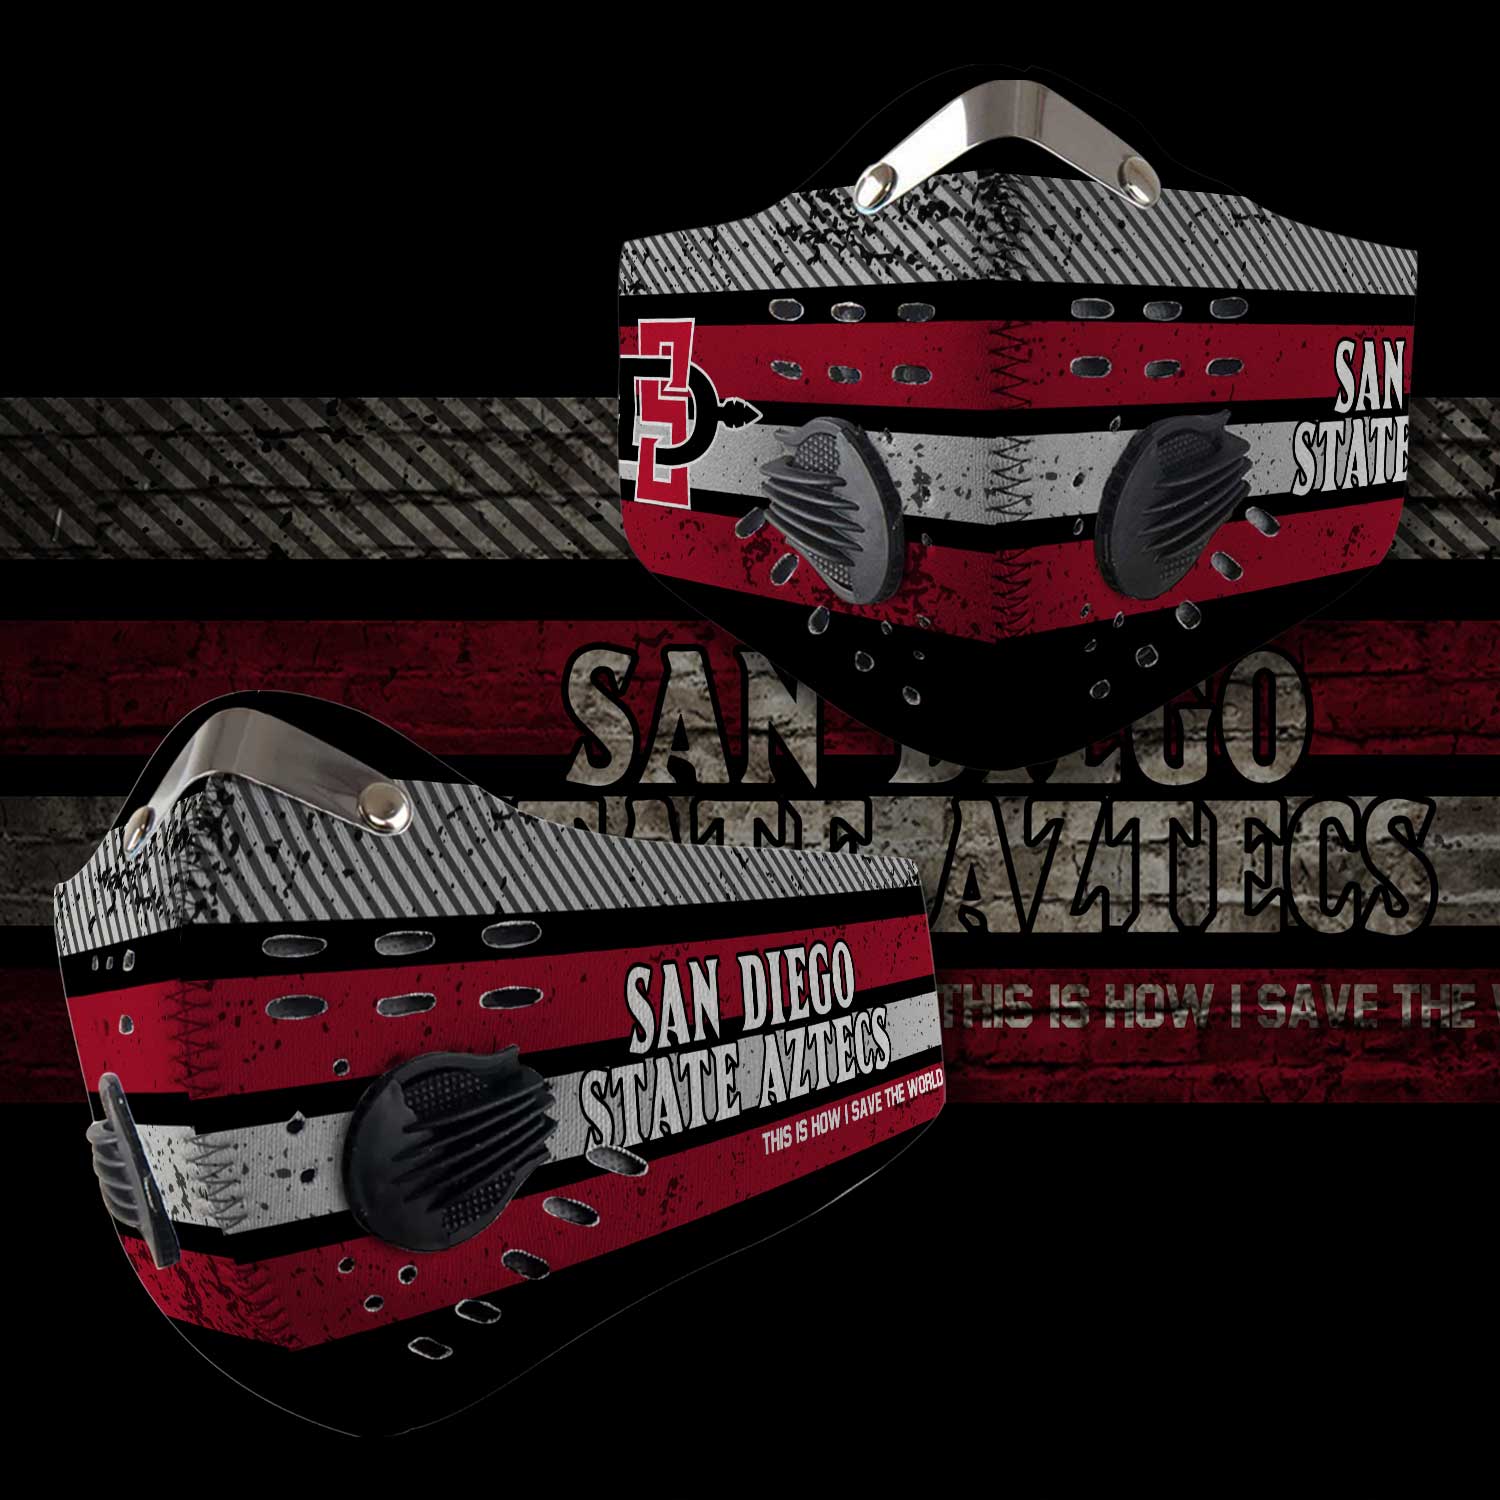 San diego state aztecs this is how i save the world face mask